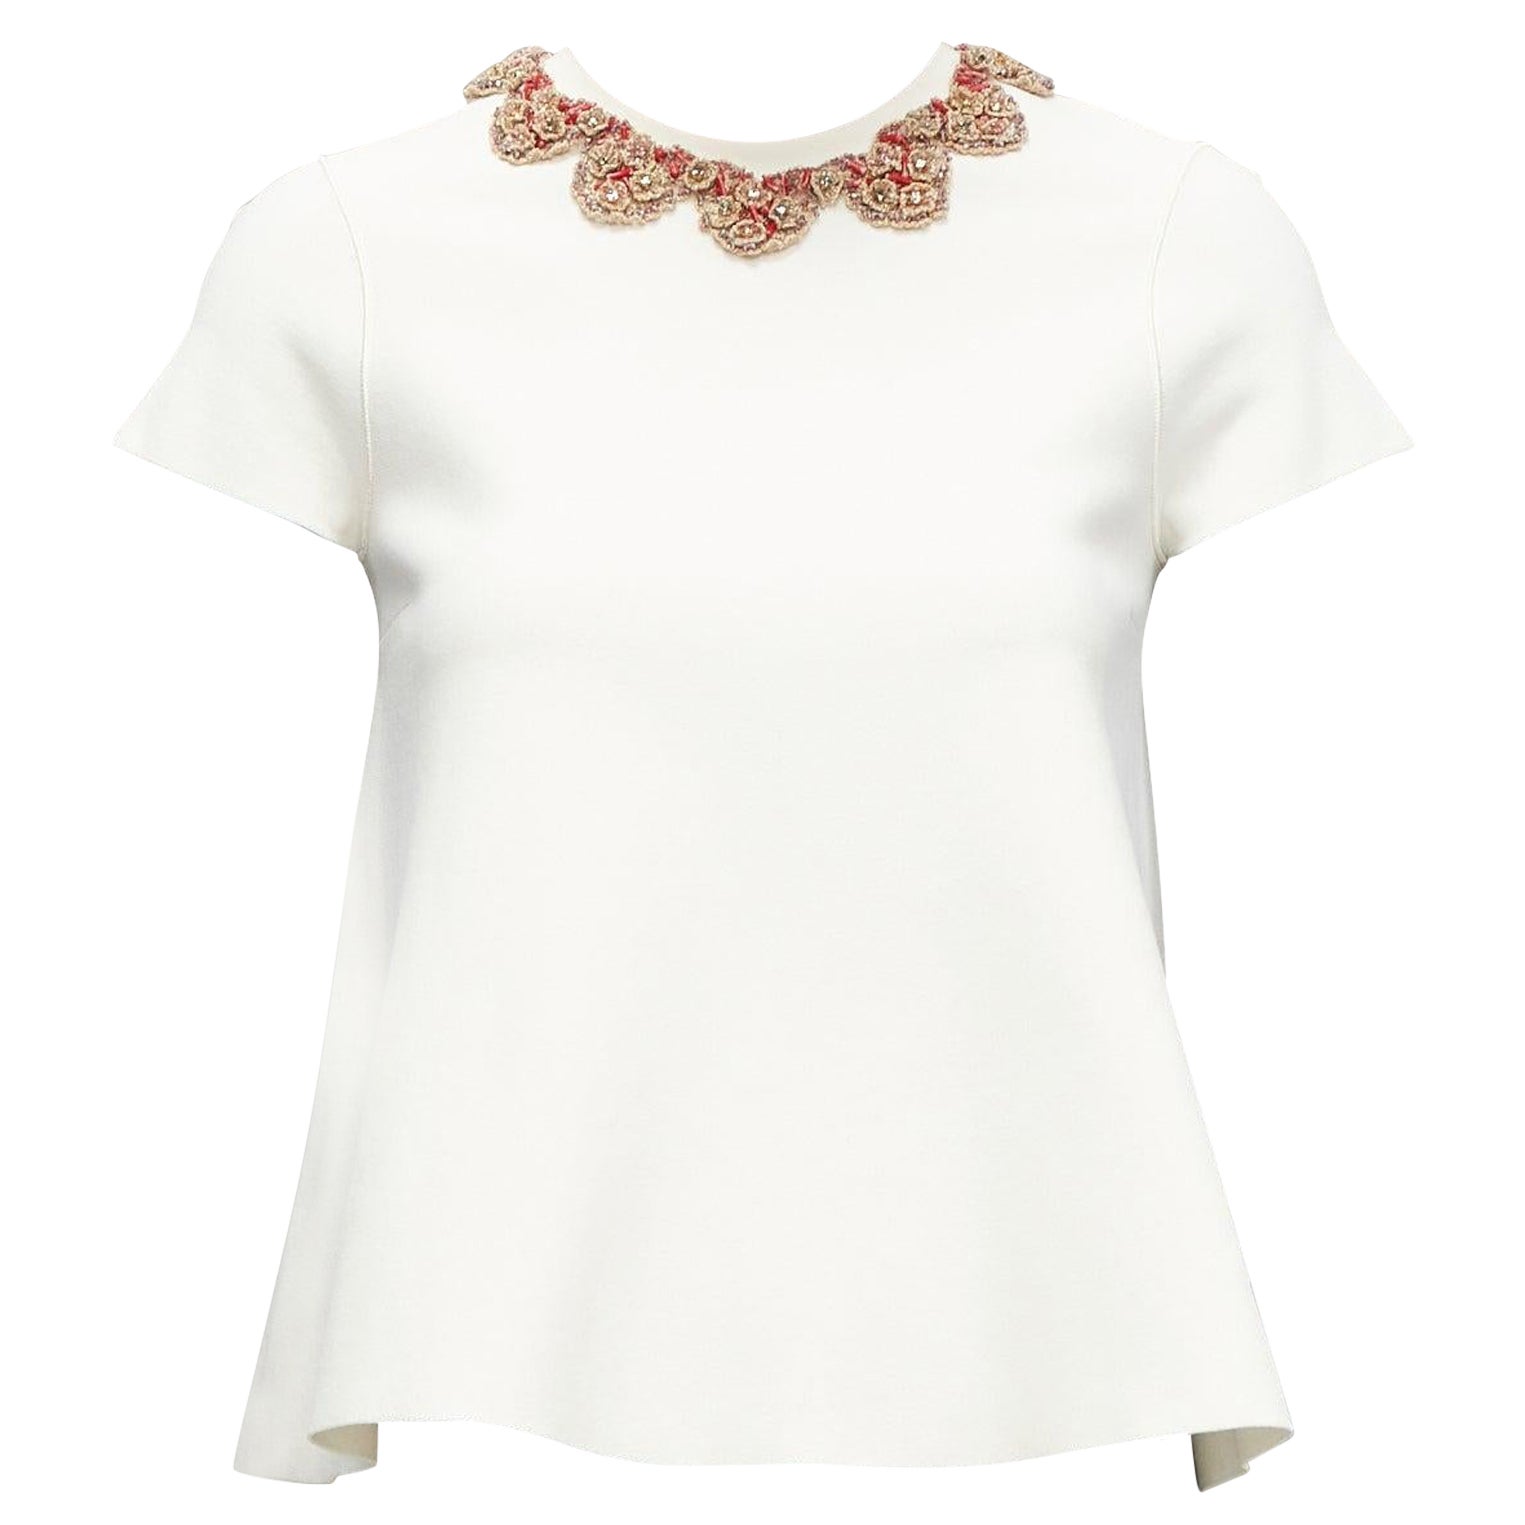 VALENTINO red gold floral applique collar cream knit Aline flare top S For Sale